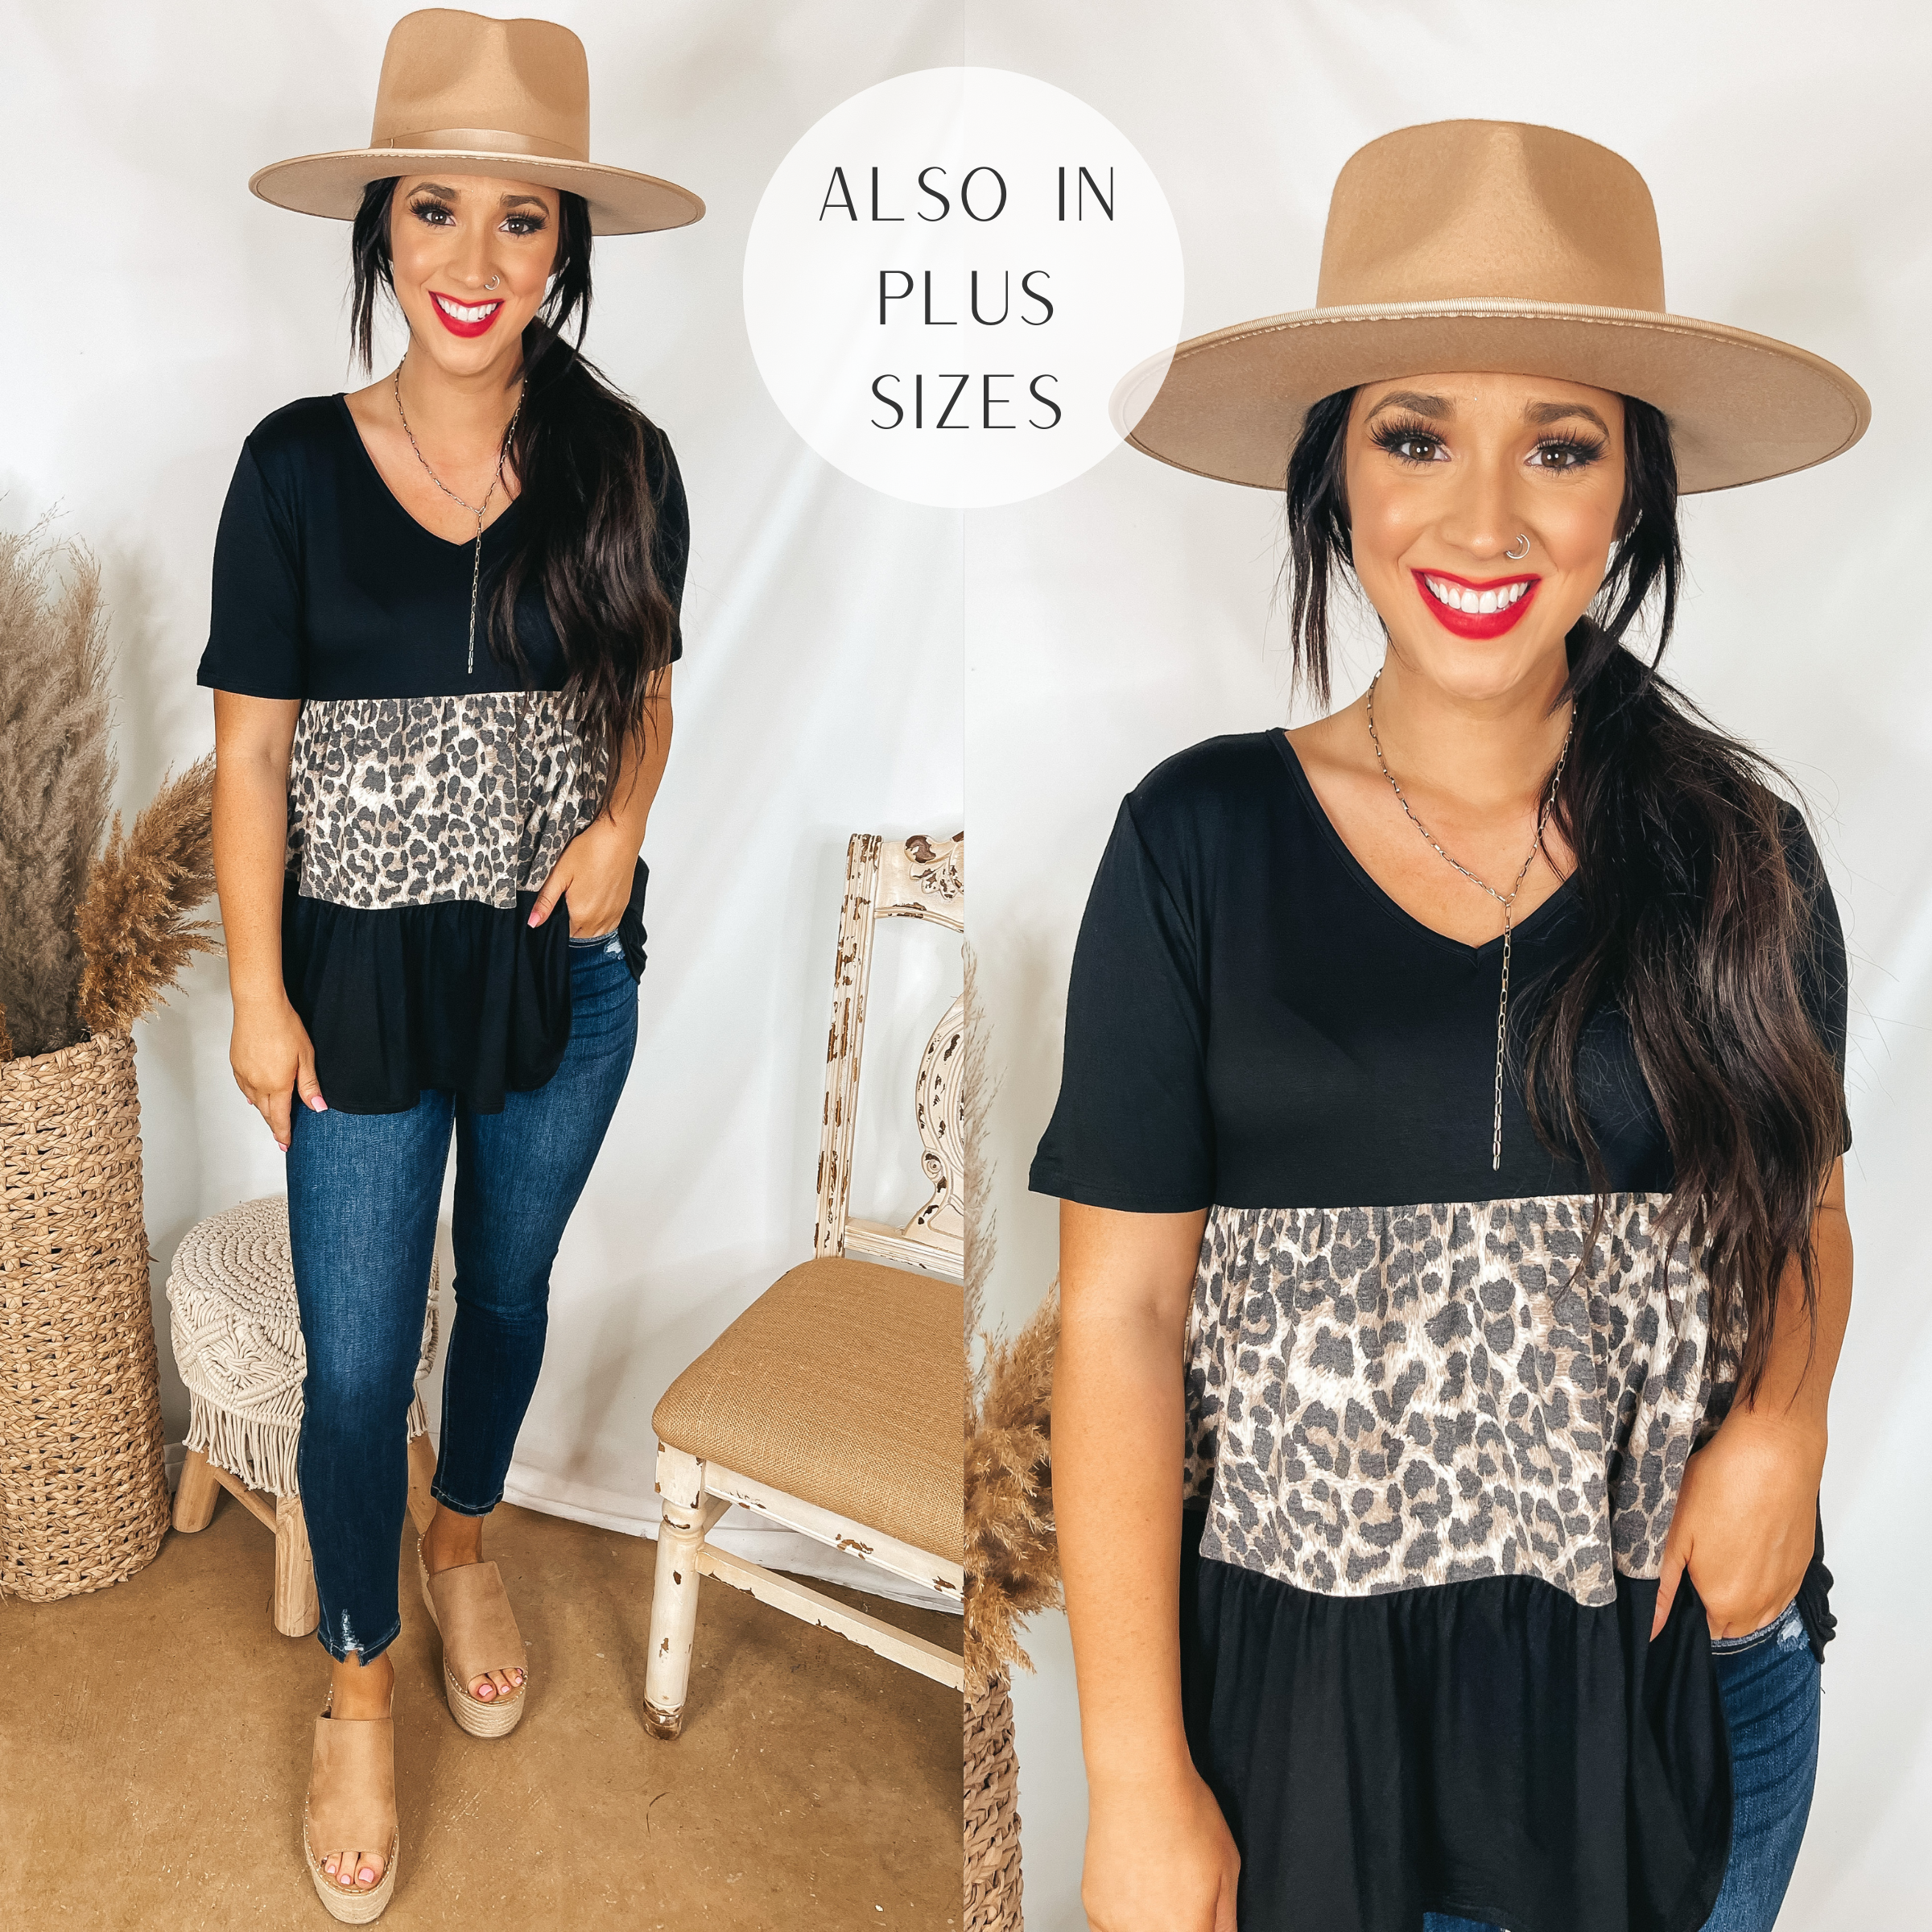 Model is wearing a leopard print and black tiered top with a v neckline. Model has it paired with dark wash skinny jeans, tan wedges, and a tan hat.